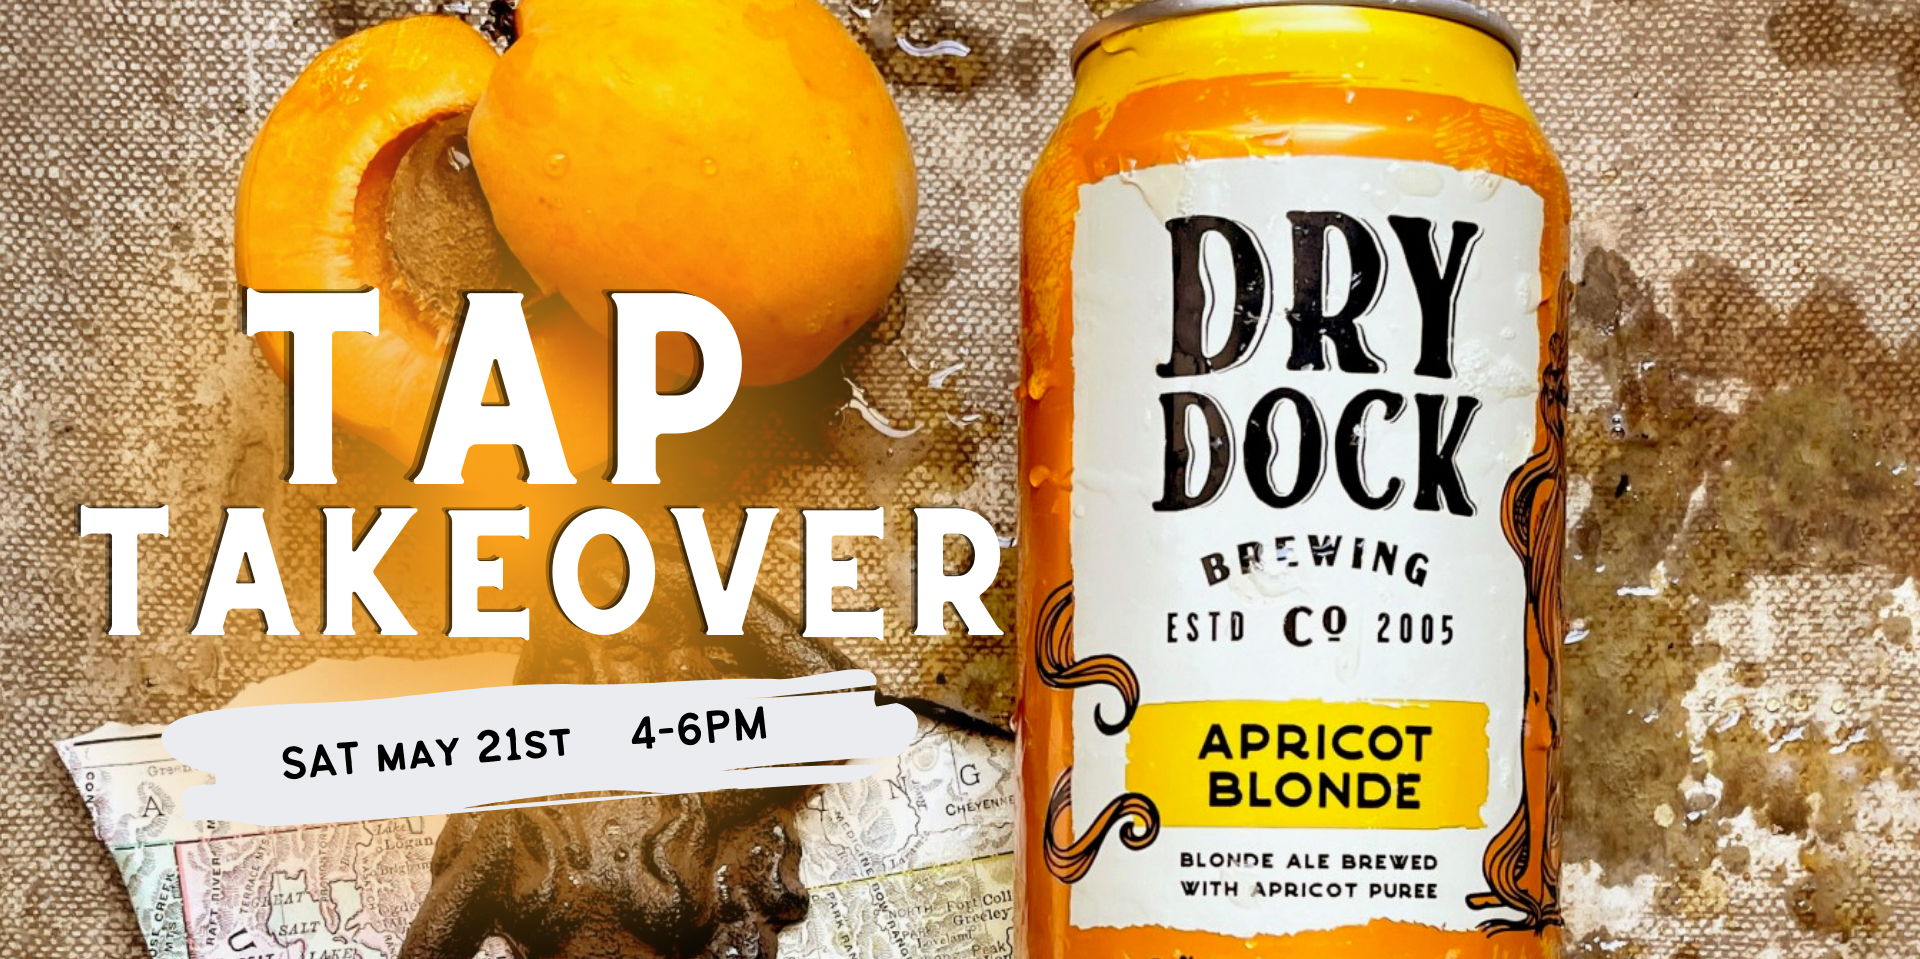 Dry Dock Tap Takeover promotional image